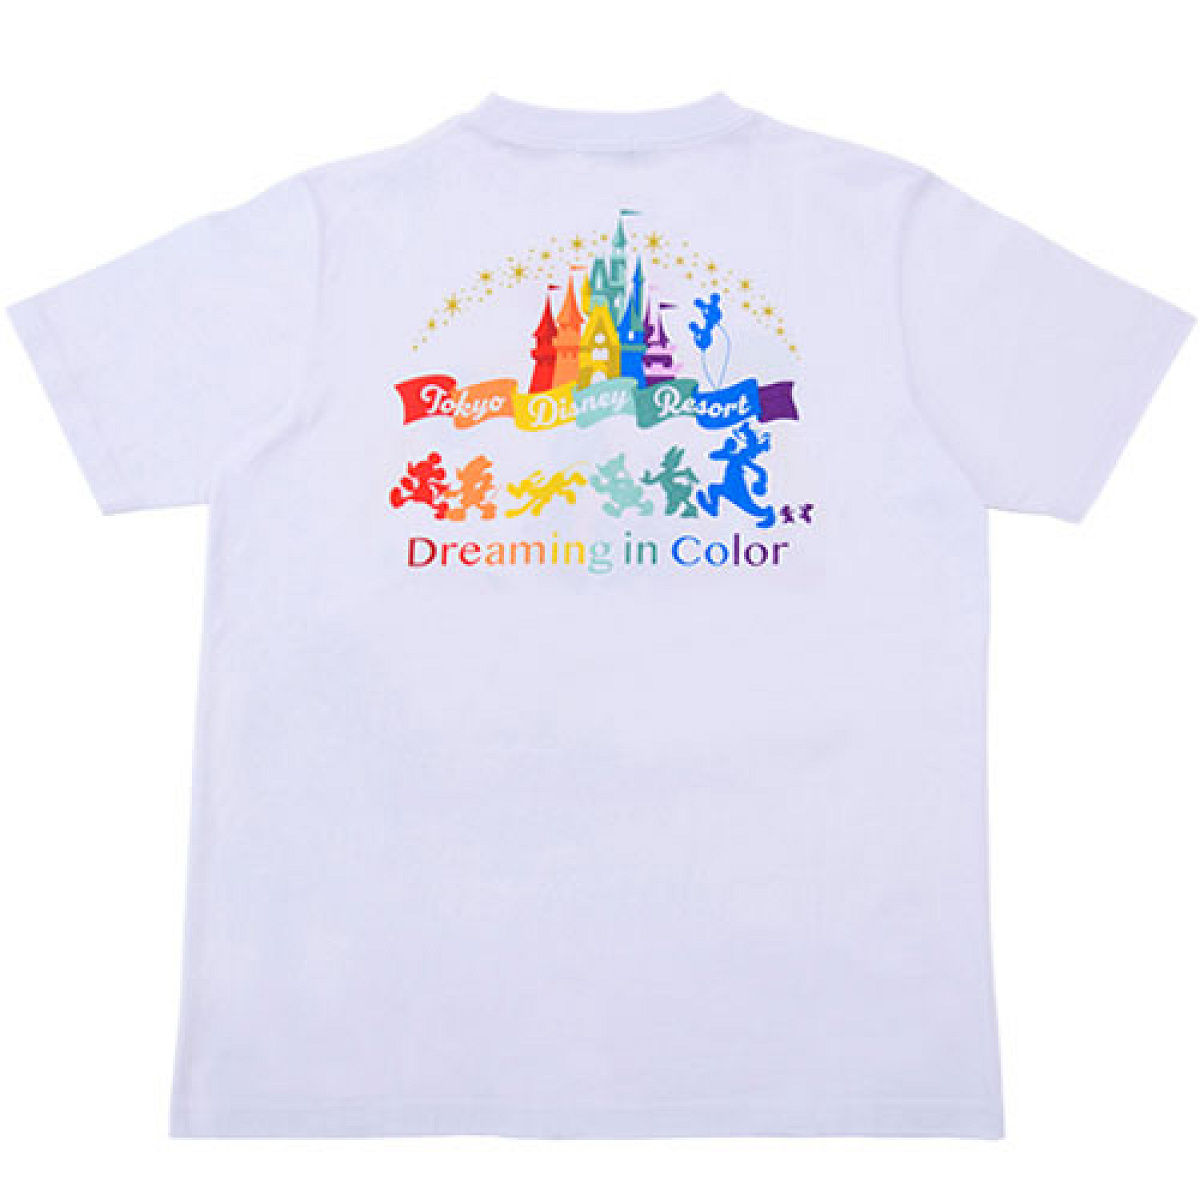 Ｔシャツ（ホワイト）／Dreaming in Color